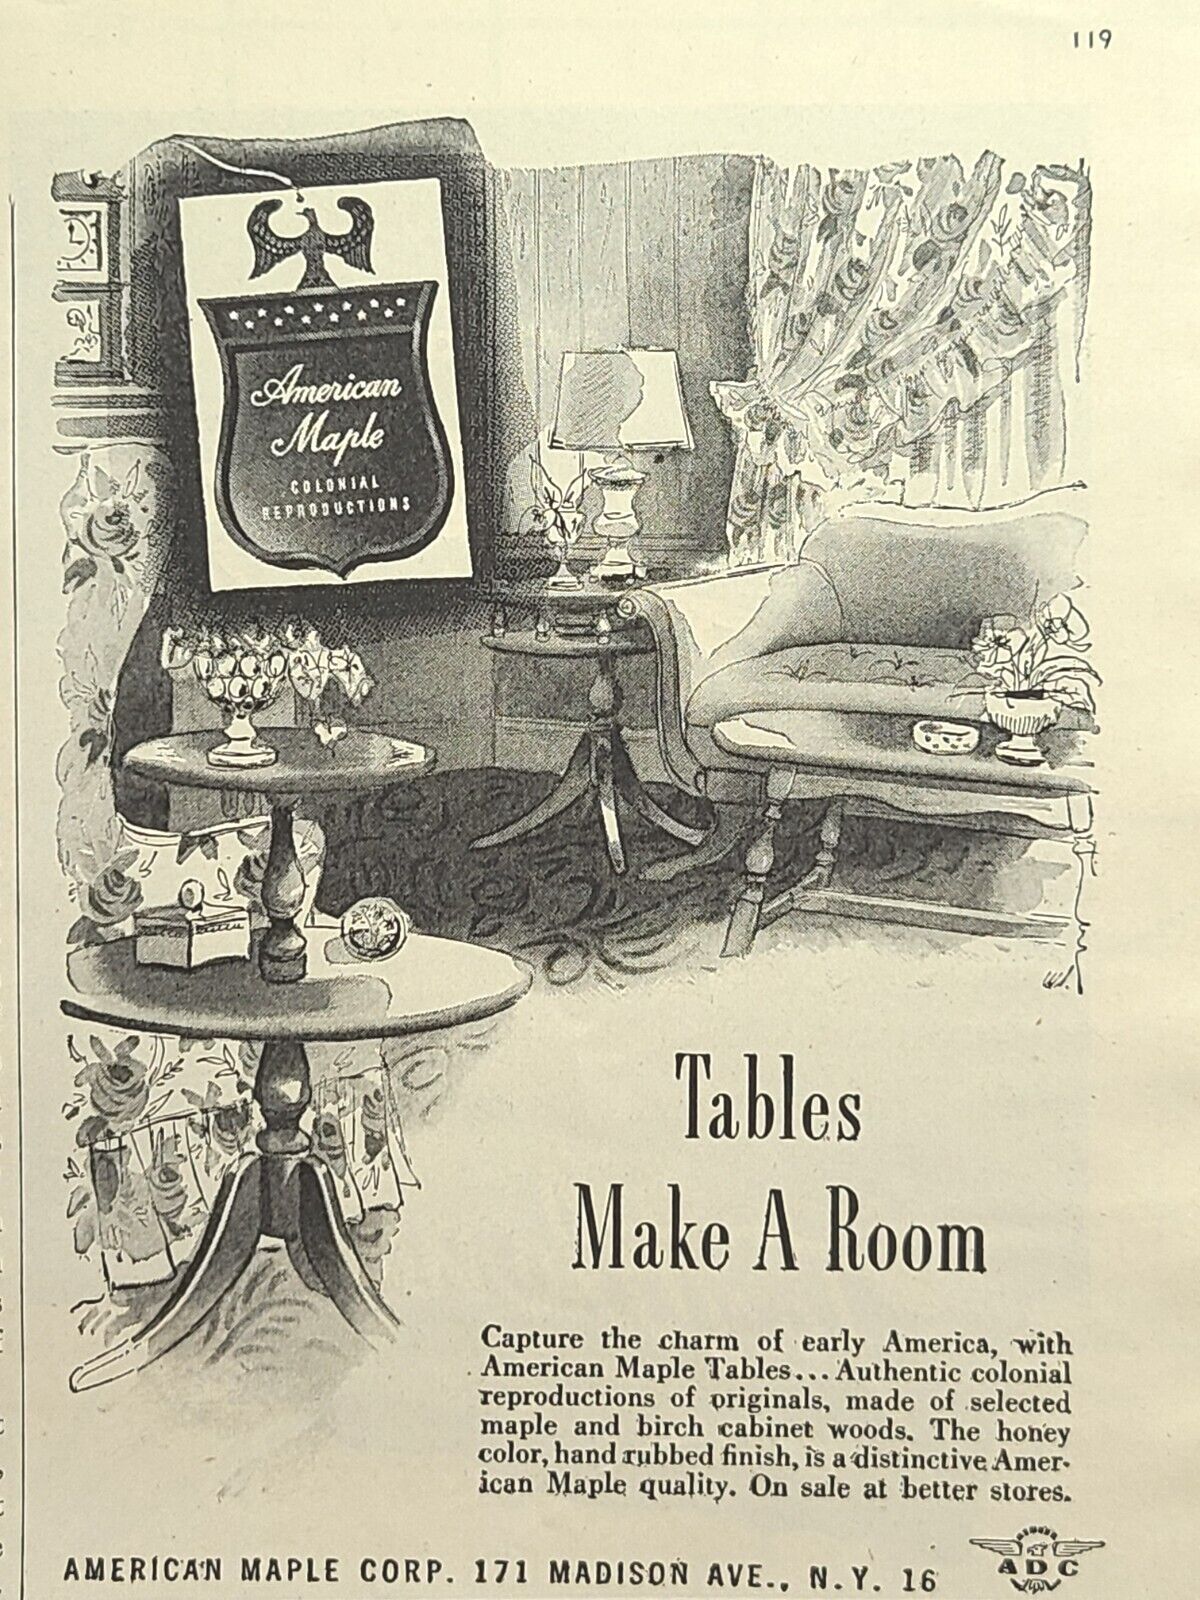 American Maple Corp Colonial Reproduction Tables Vintage Print Ad 1946